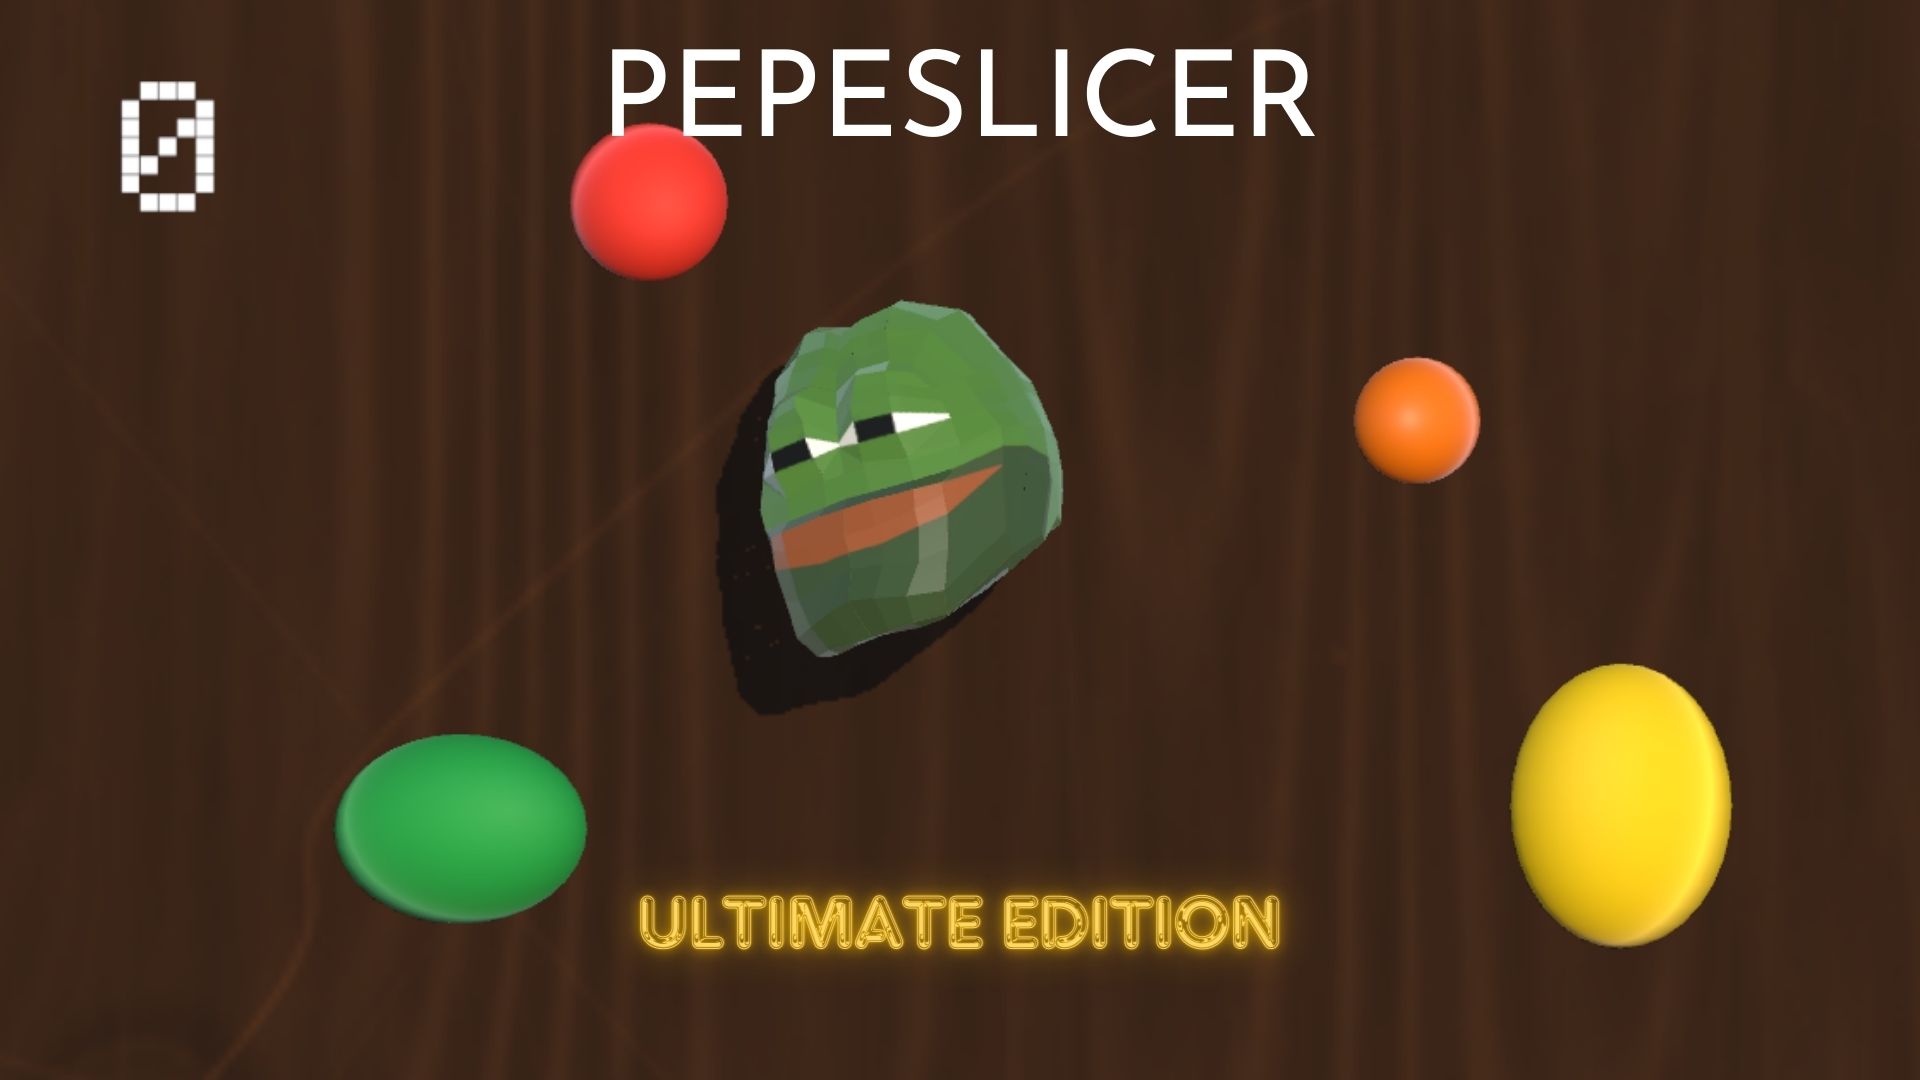 PEPESLICER - ULTIMATE EDITION